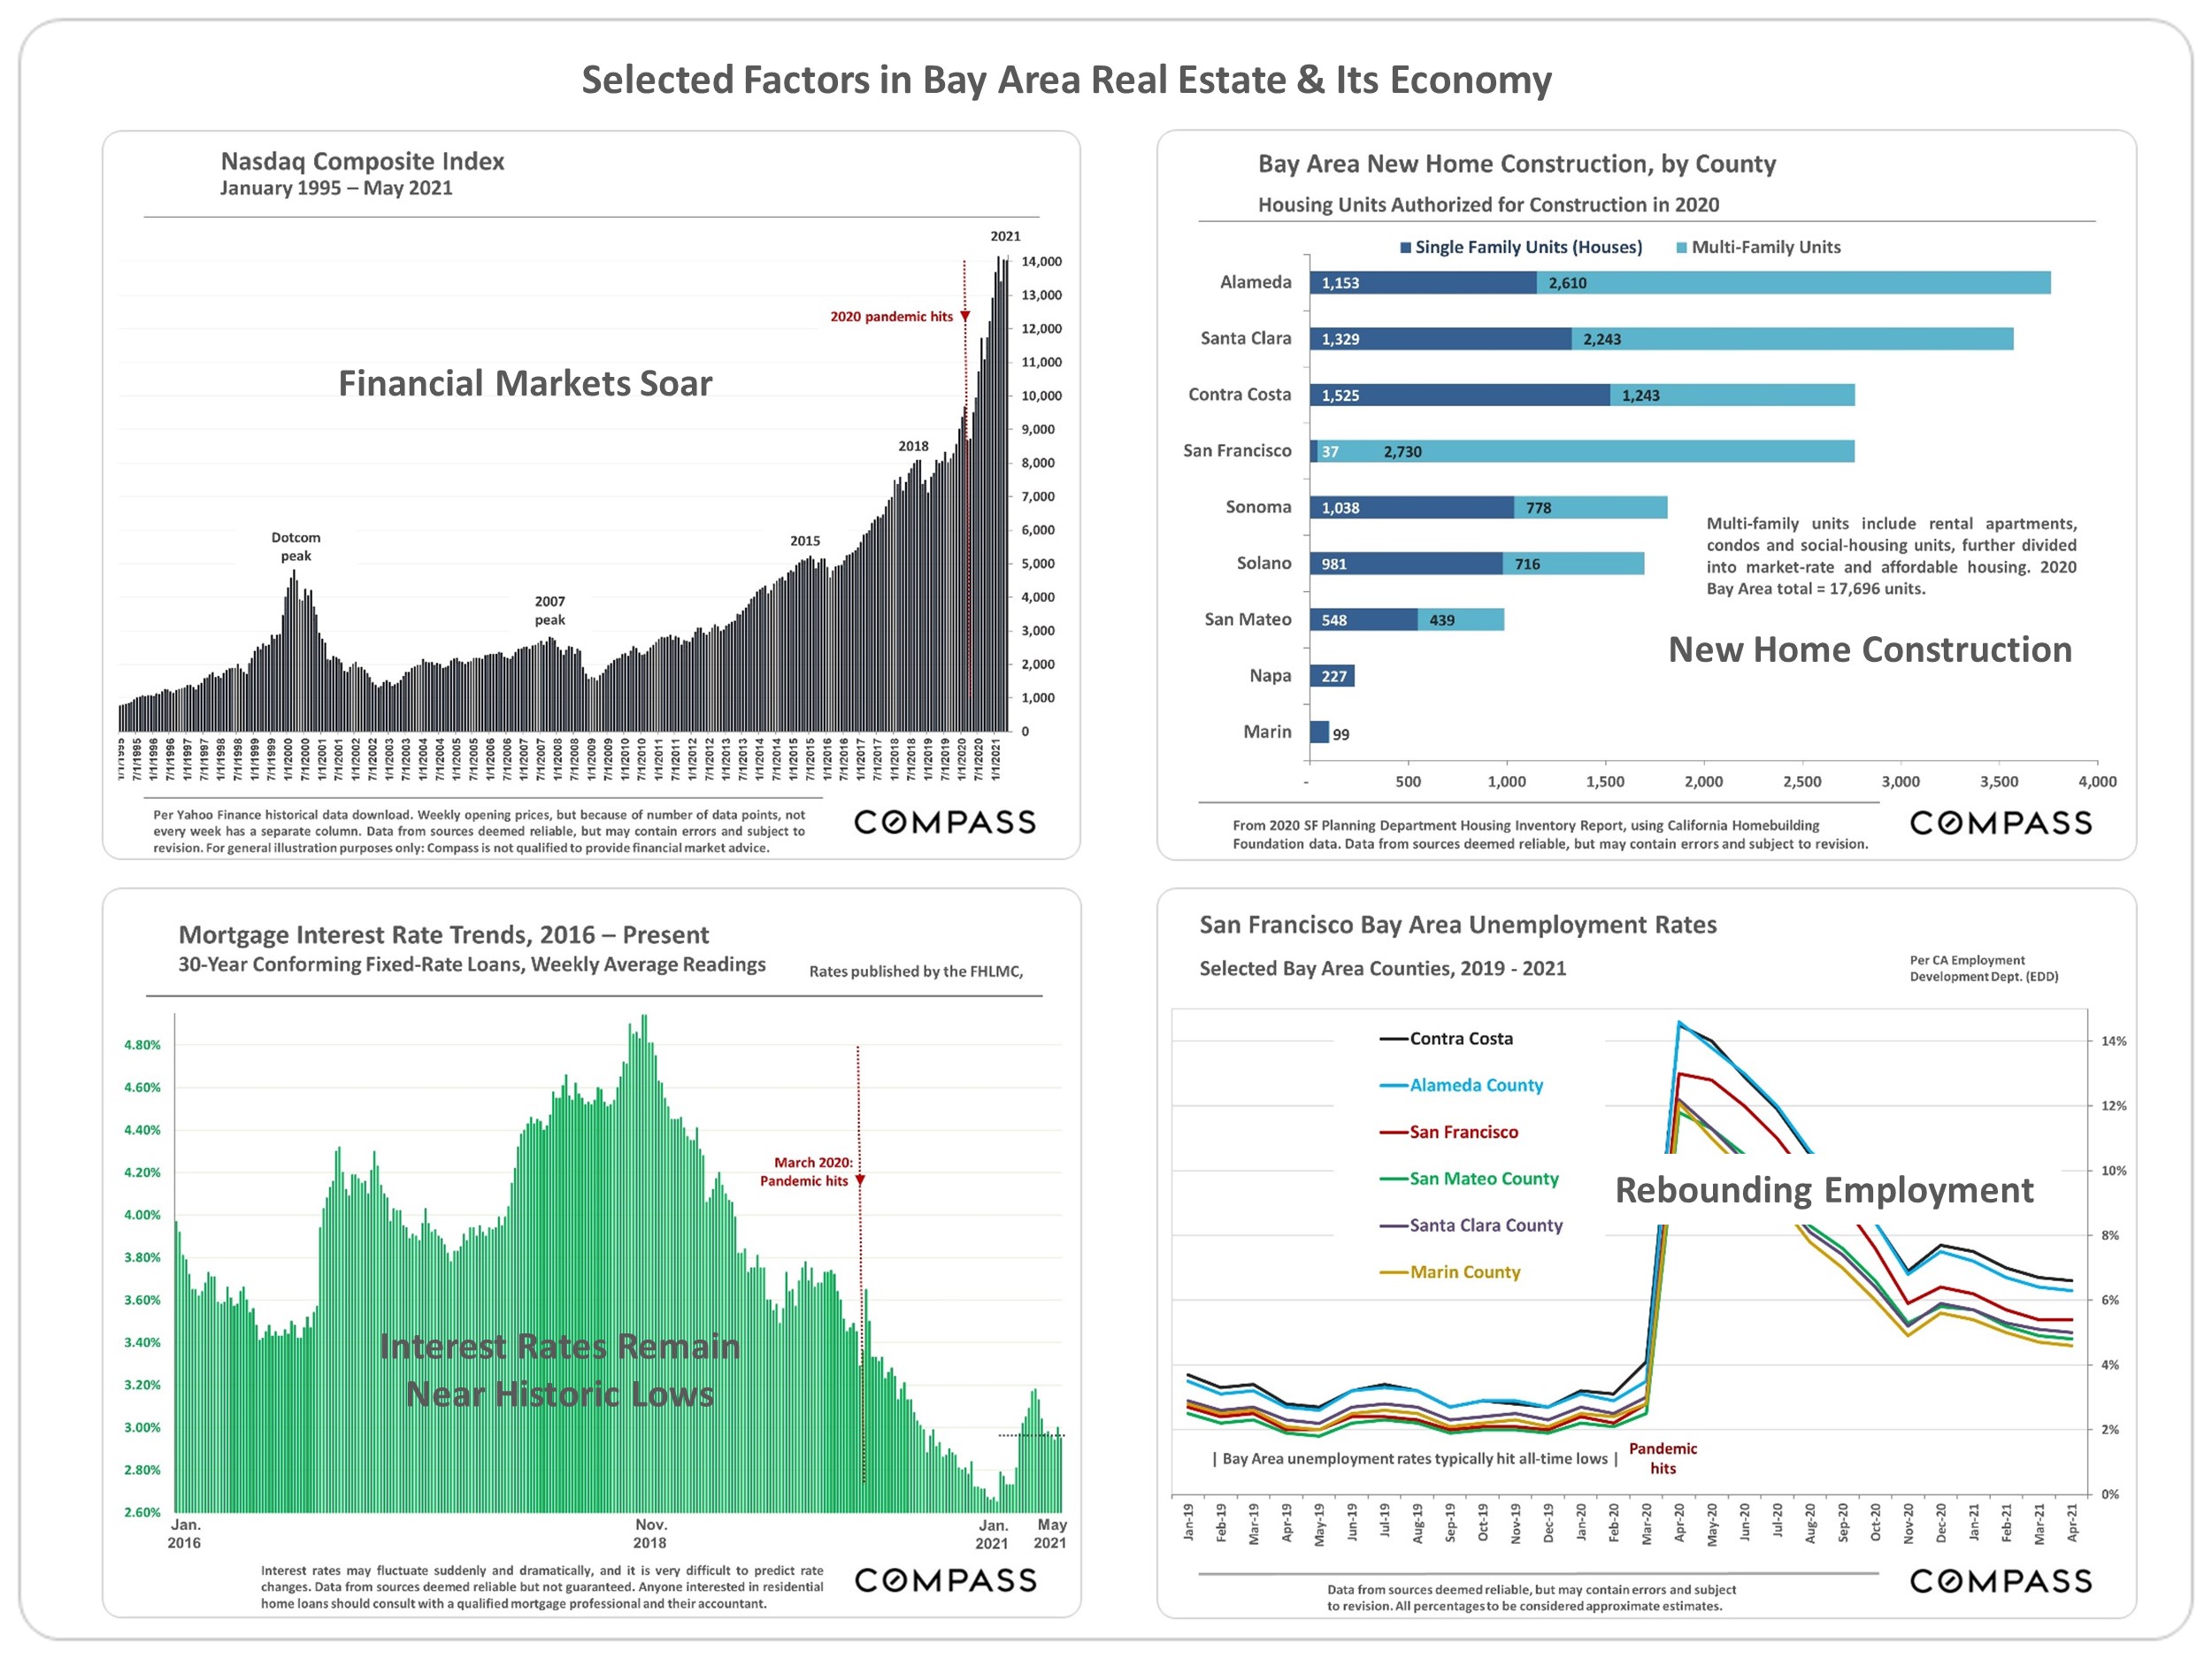 Charts showing Selected Factors in Bay Area Real Estate & Its Economy including Nasdaq Composite Index, Mortgage Interest Rate Trends (2016 - Present), Bay Area New Home Construction by County (2020), San Francisco Bay Area Unemployment Rates (2019 - 2021)